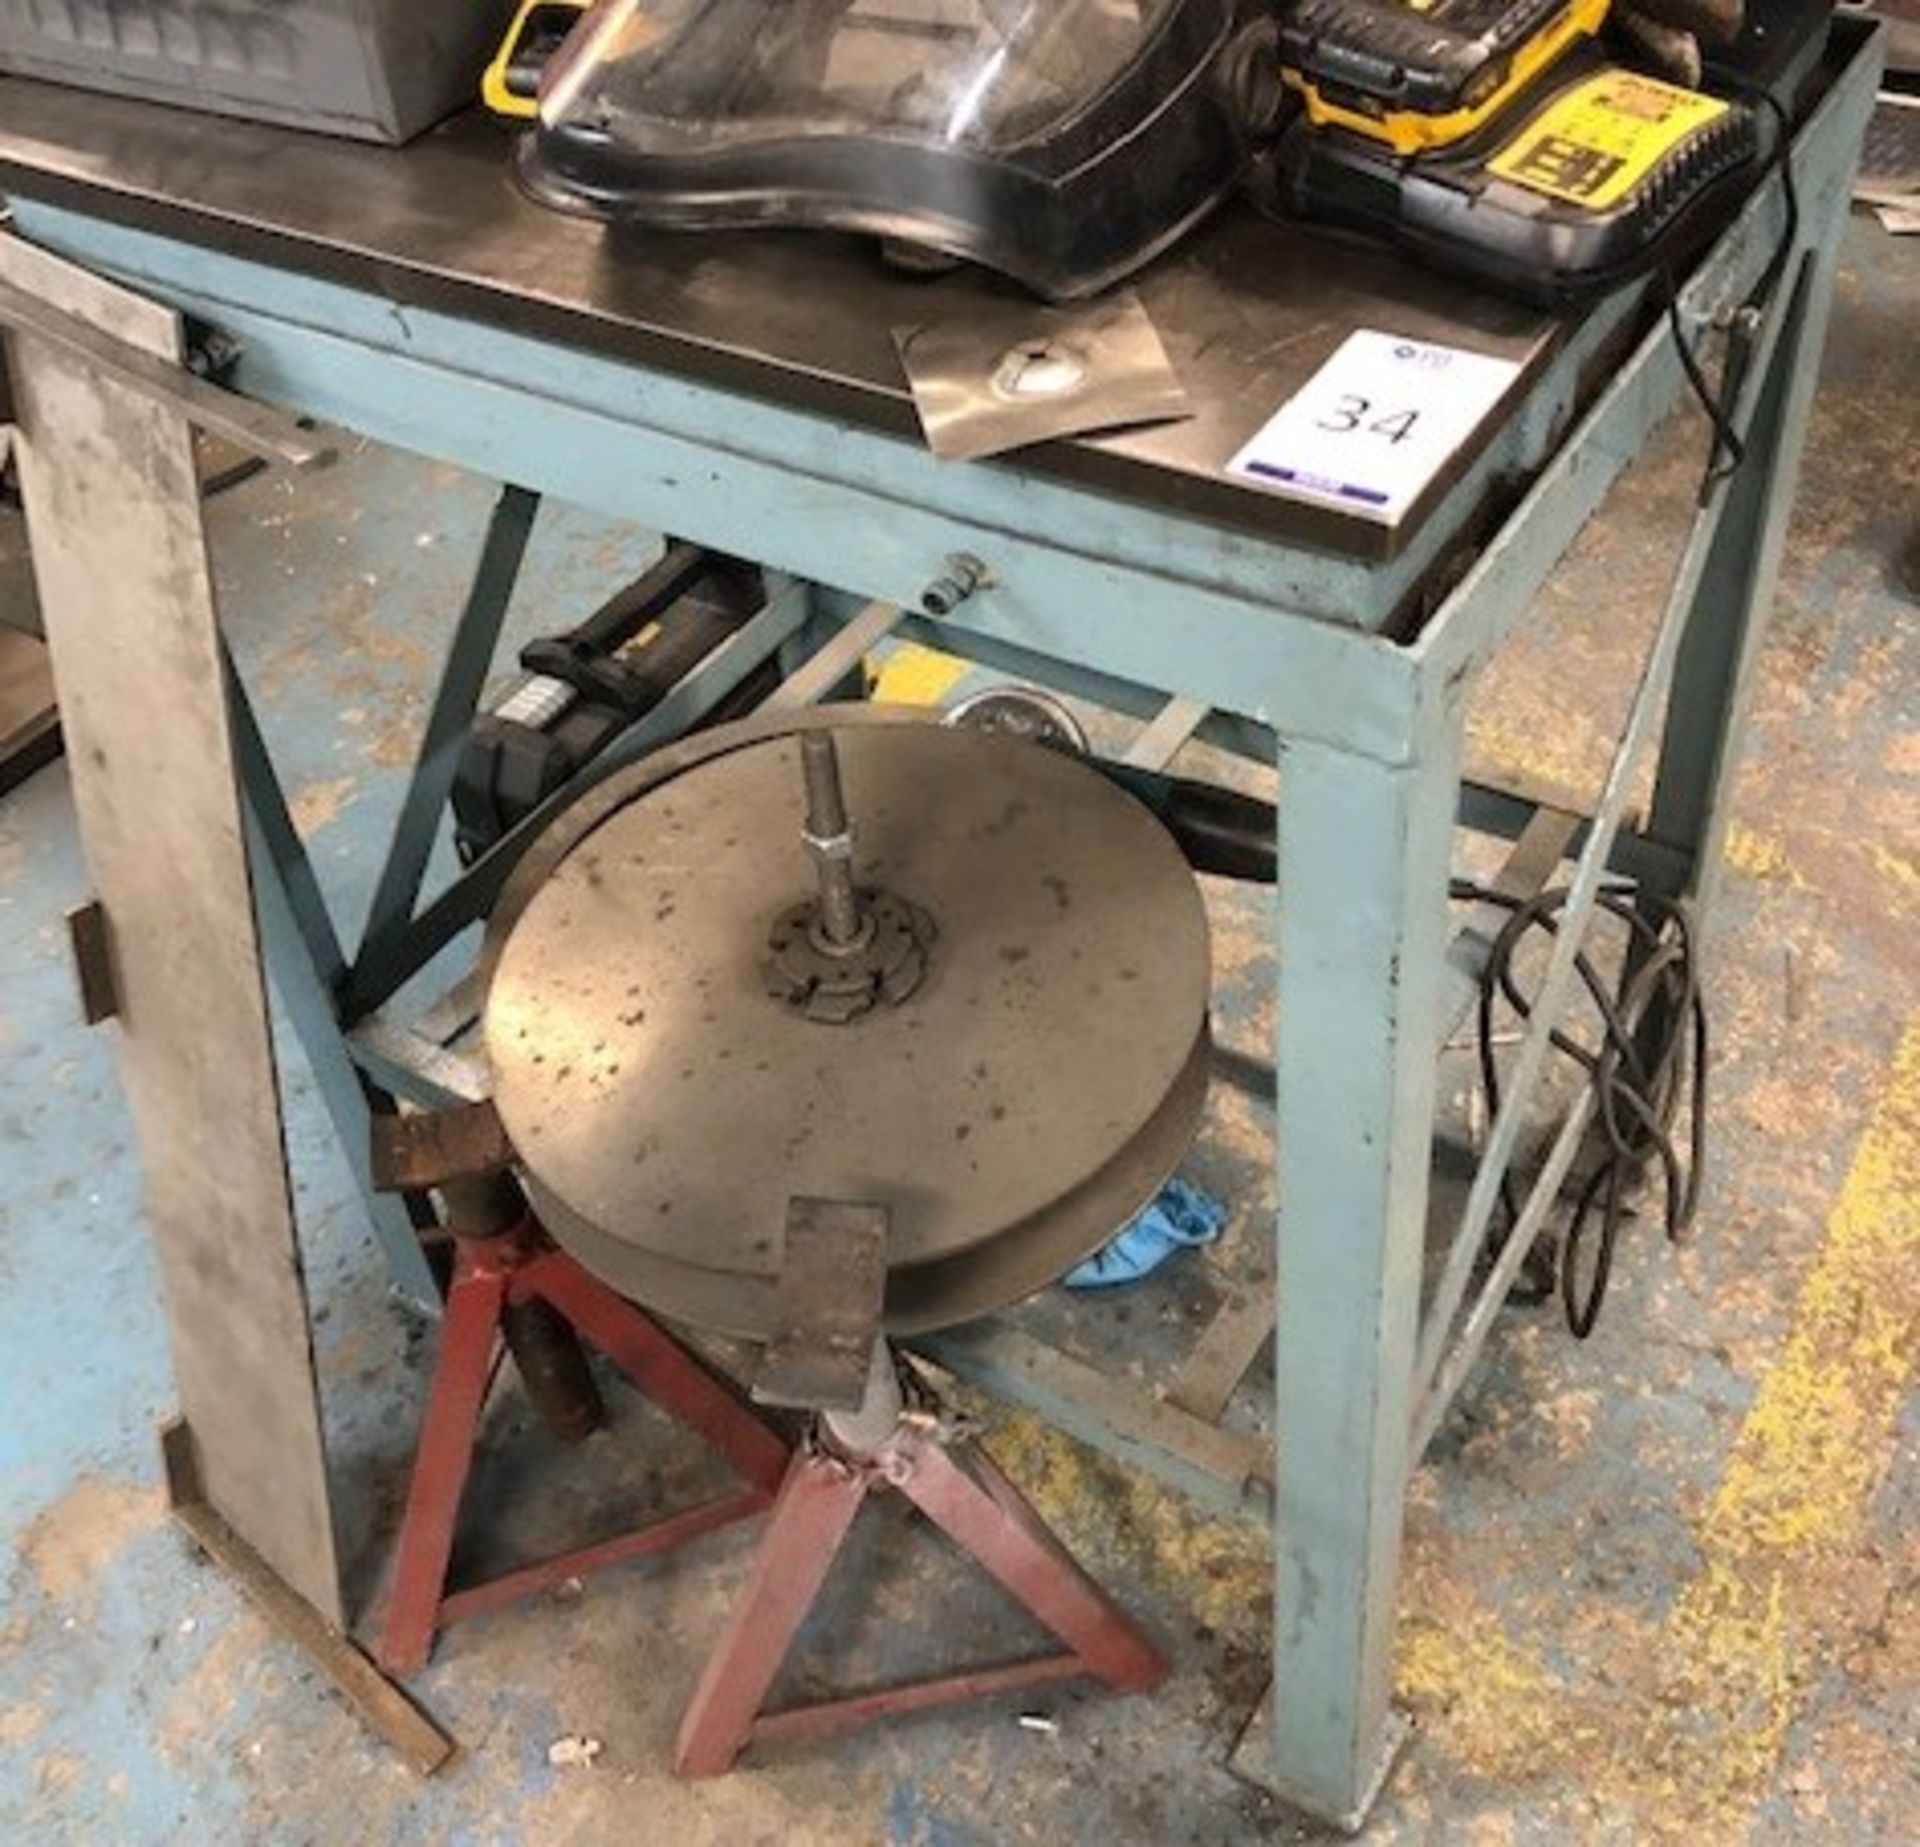 Steel Surface Table on Stand 2’ 6” x 2’ (Excluding Contents) (Location: Kettering - See General